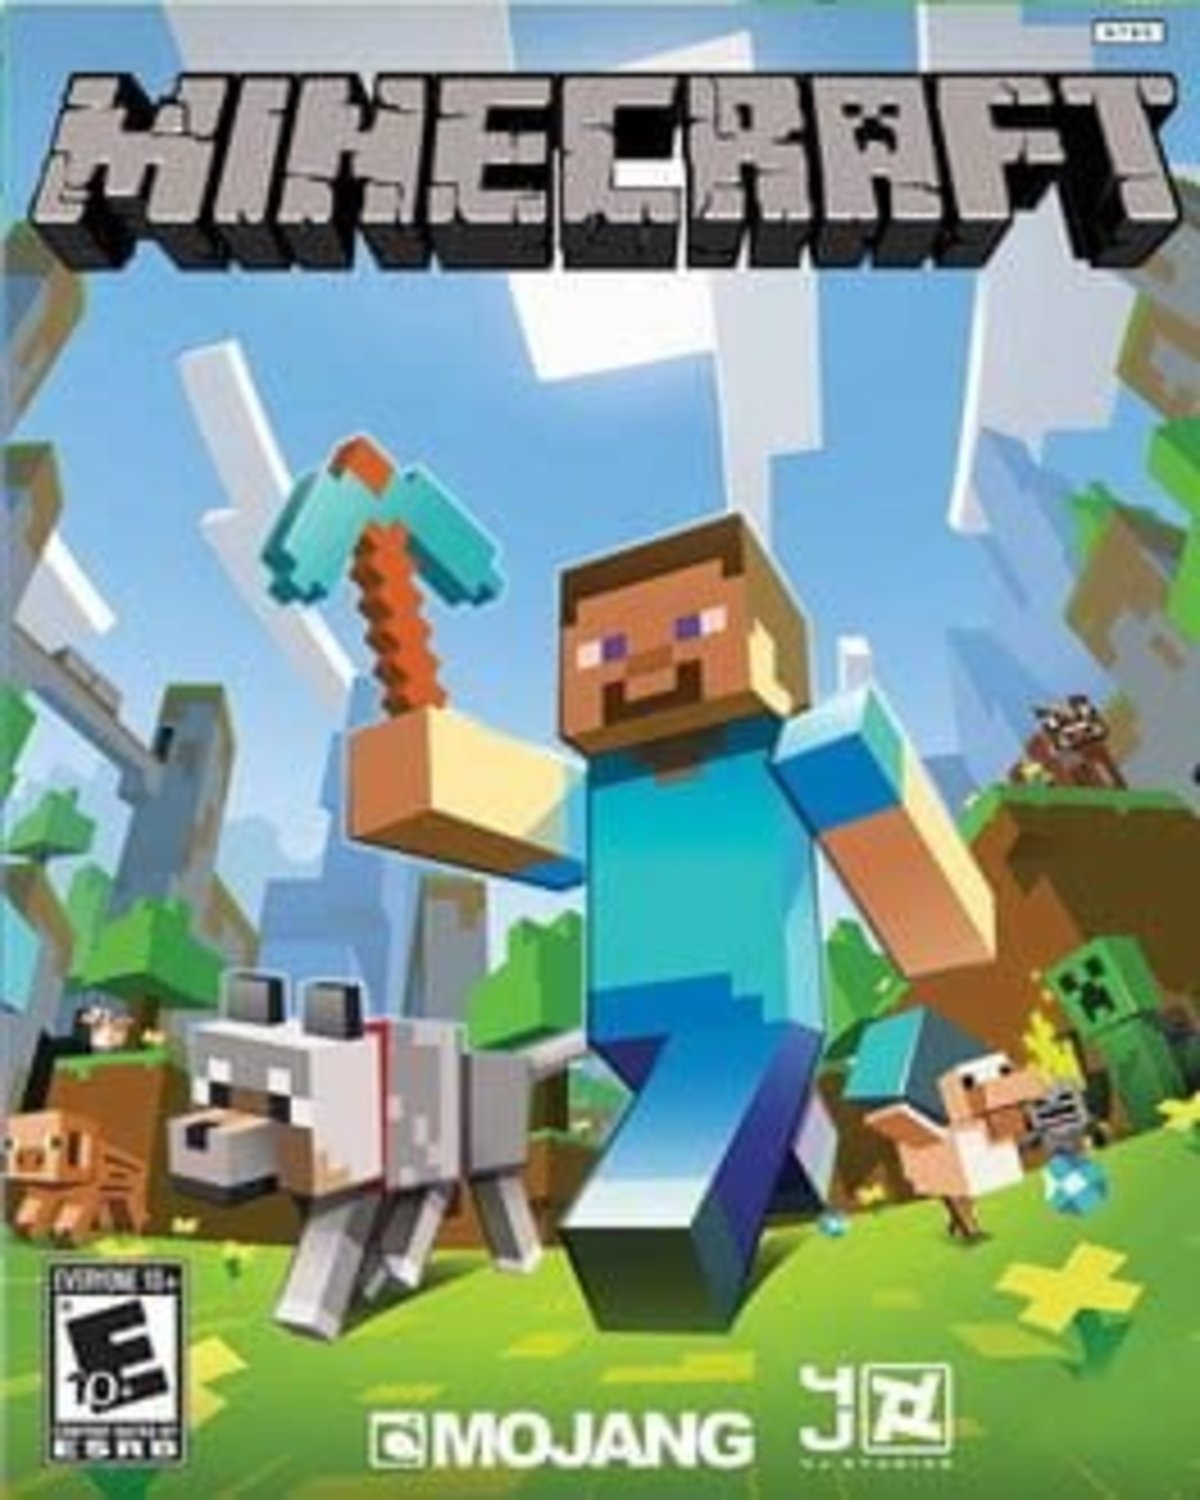 Two new Minecraft games would be on the way with Mojang